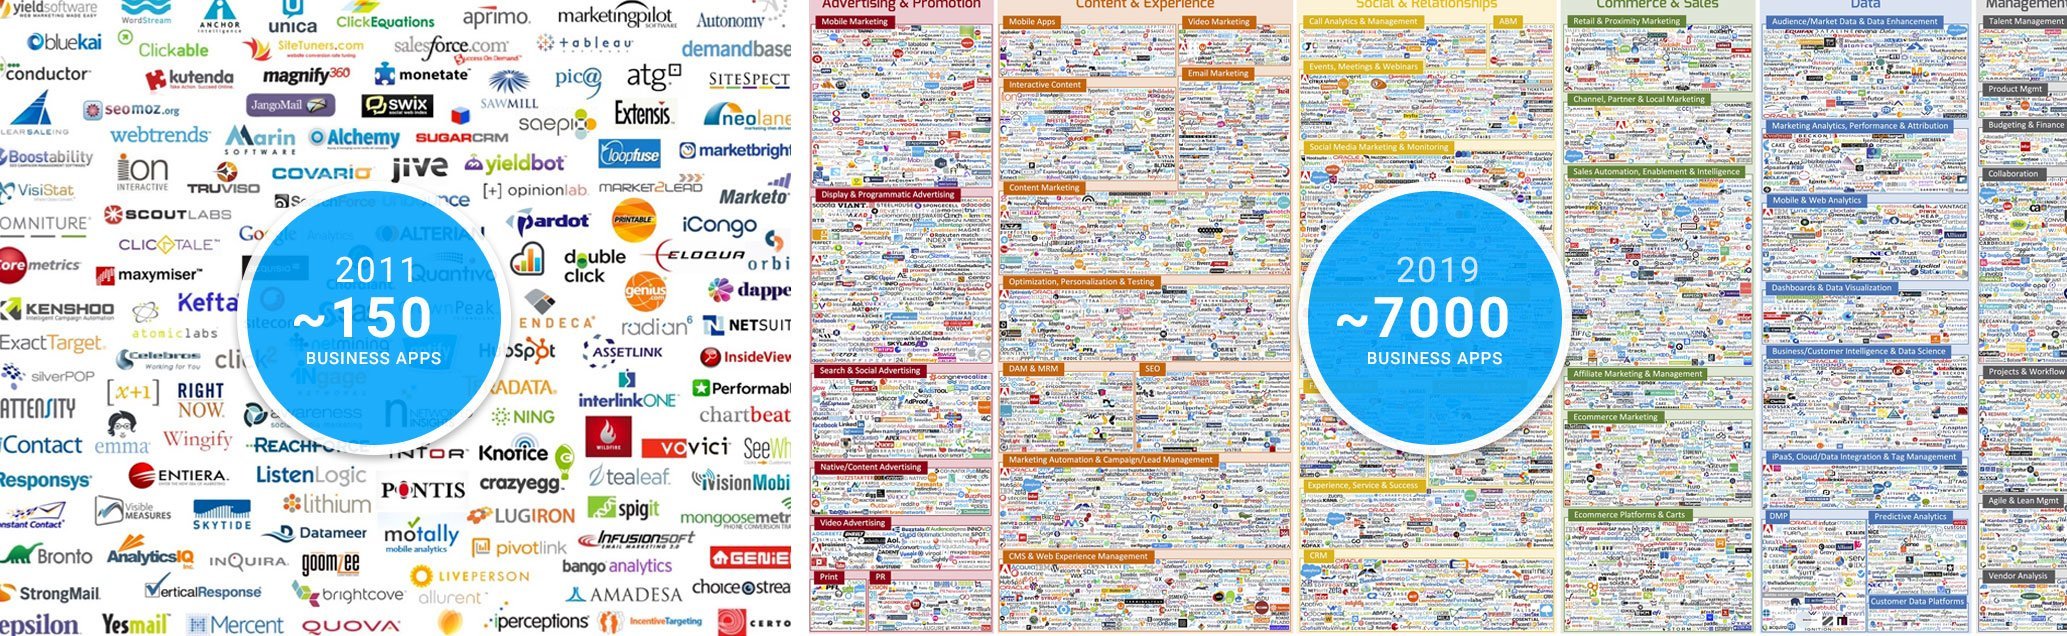 infographic showing only 150 business apps in 2011 versus 7000 apps today